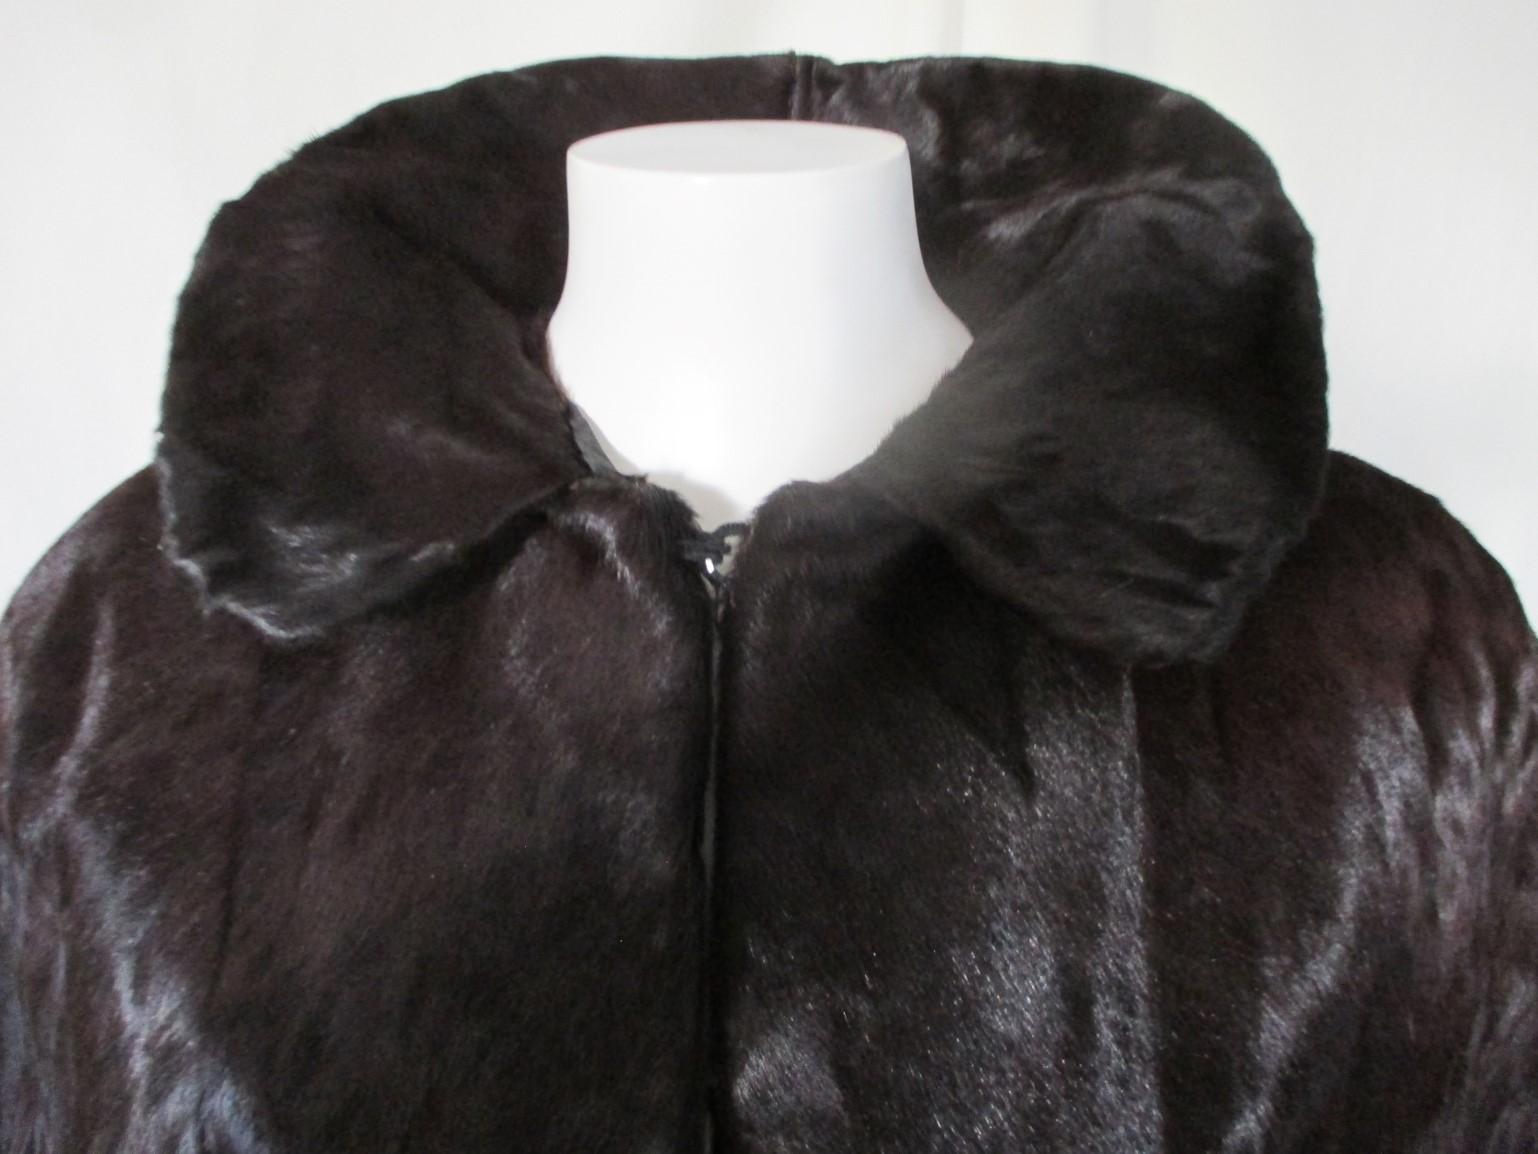 This vintage cape is made of glossy pony skin fur.
It has 3 closing hooks , no pockets
Color; brownish black
Size fits small to medium.

Please note that vintage items are not new and therefore might have minor imperfections.